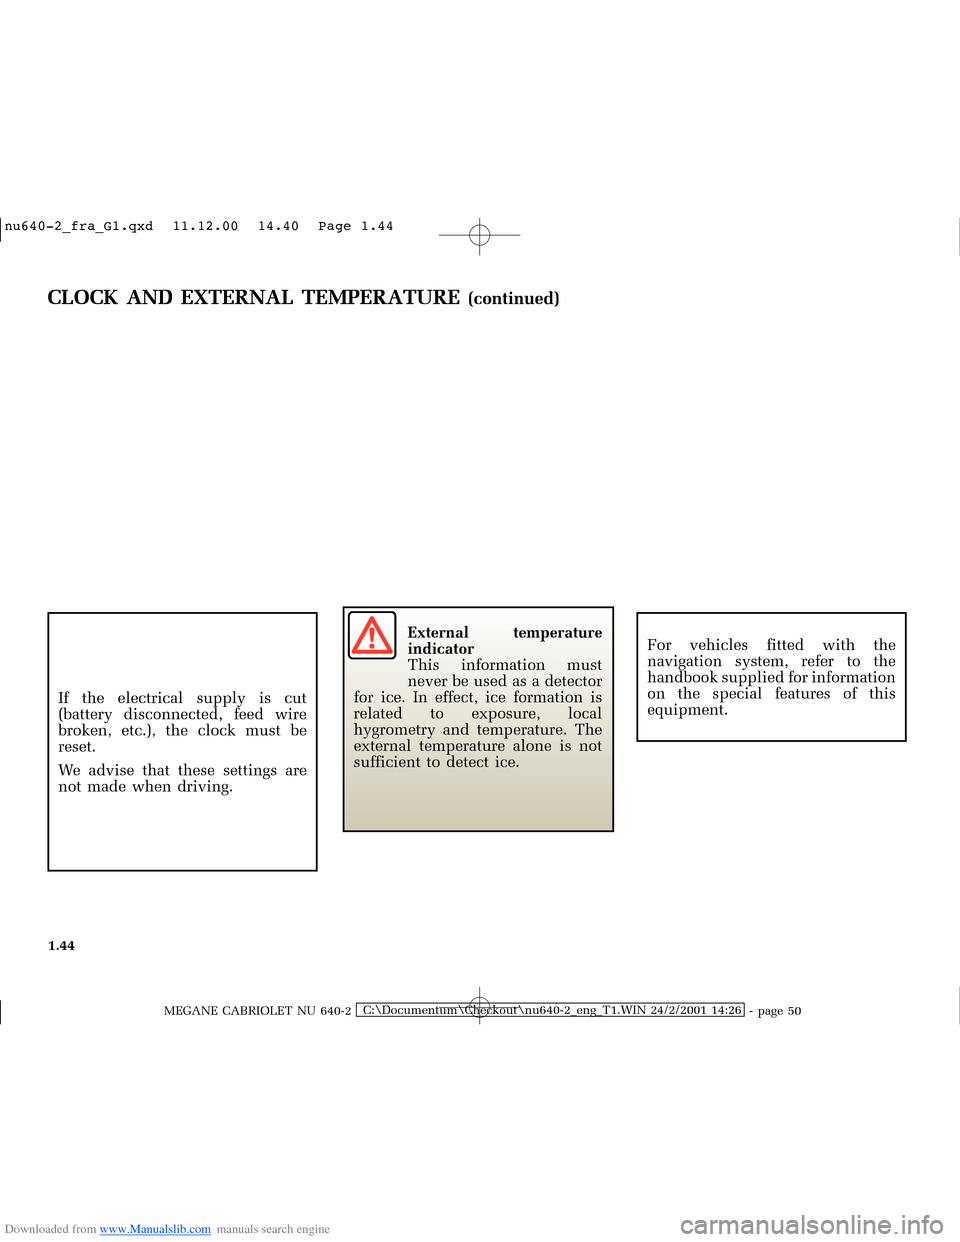 RENAULT MEGANE 2000 X64 / 1.G Owners Manual Downloaded from www.Manualslib.com manuals search engine �Q�X������B�I�U�D�B�*���T�[�G� � ��������� � ������ � �3�D�J�H� ����
MEGANE CABRIOLET NU 640-2C:\Documentum\Chec